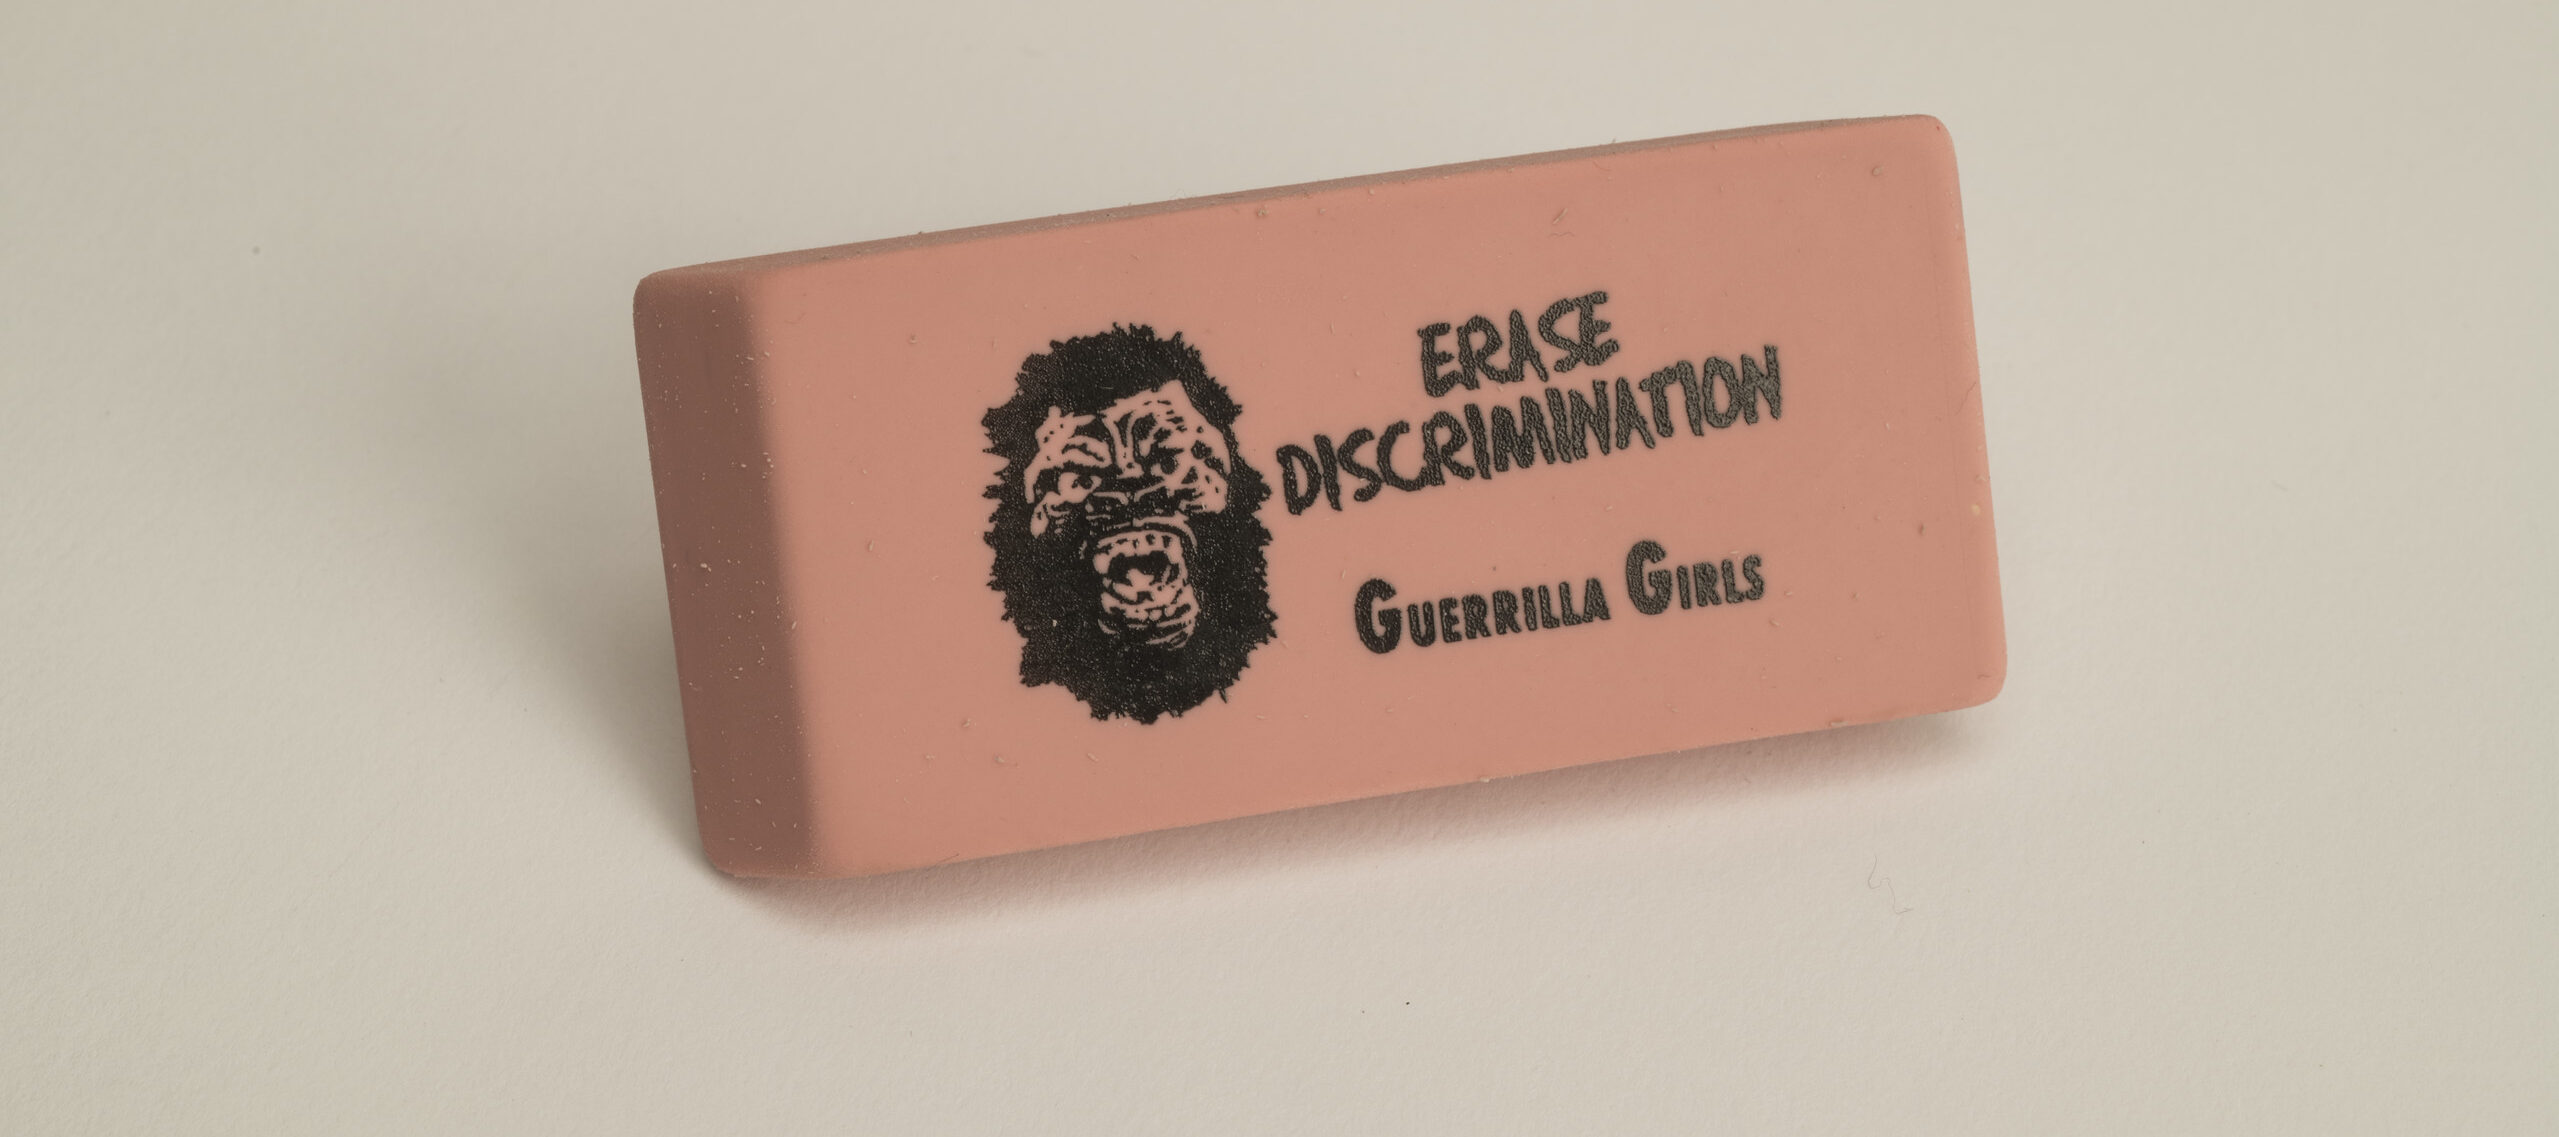 A rectangular pink eraser against a white background. Printed on the eraser in black is a yelling gorilla face to the left of the words, 